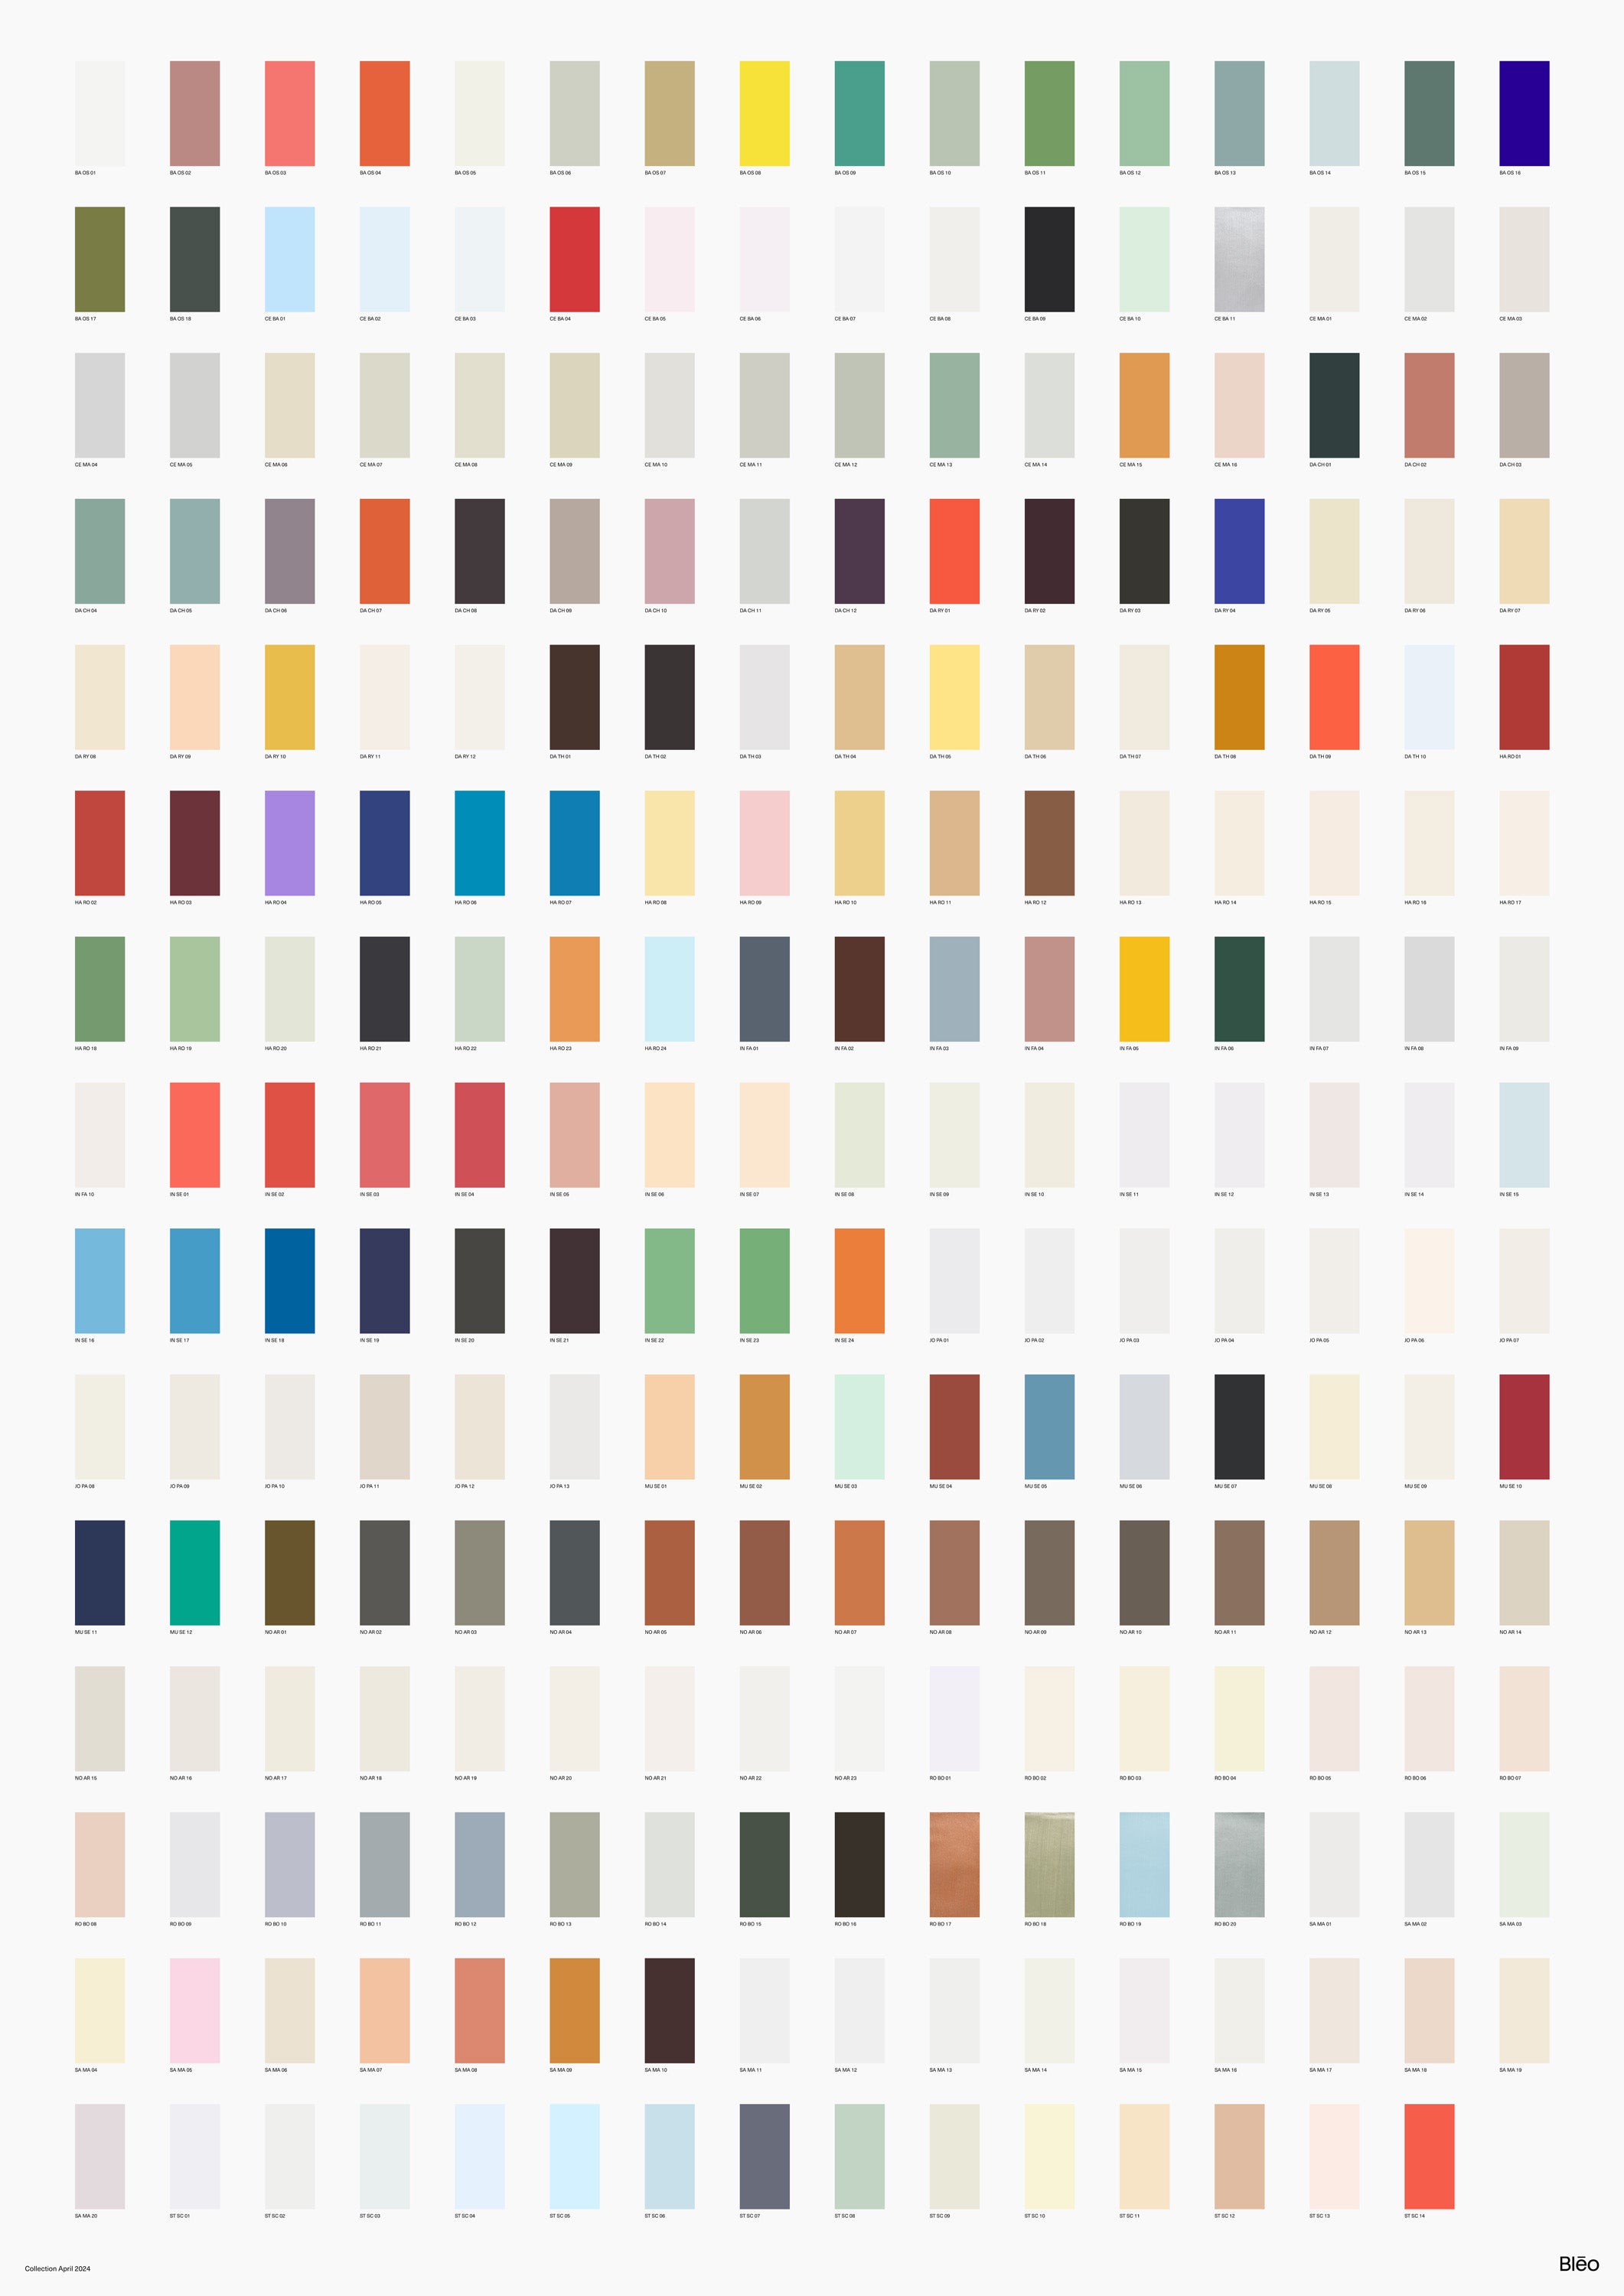 Bleō’s full paint collection. 239 colours compiled into 15 distinctive palettes.